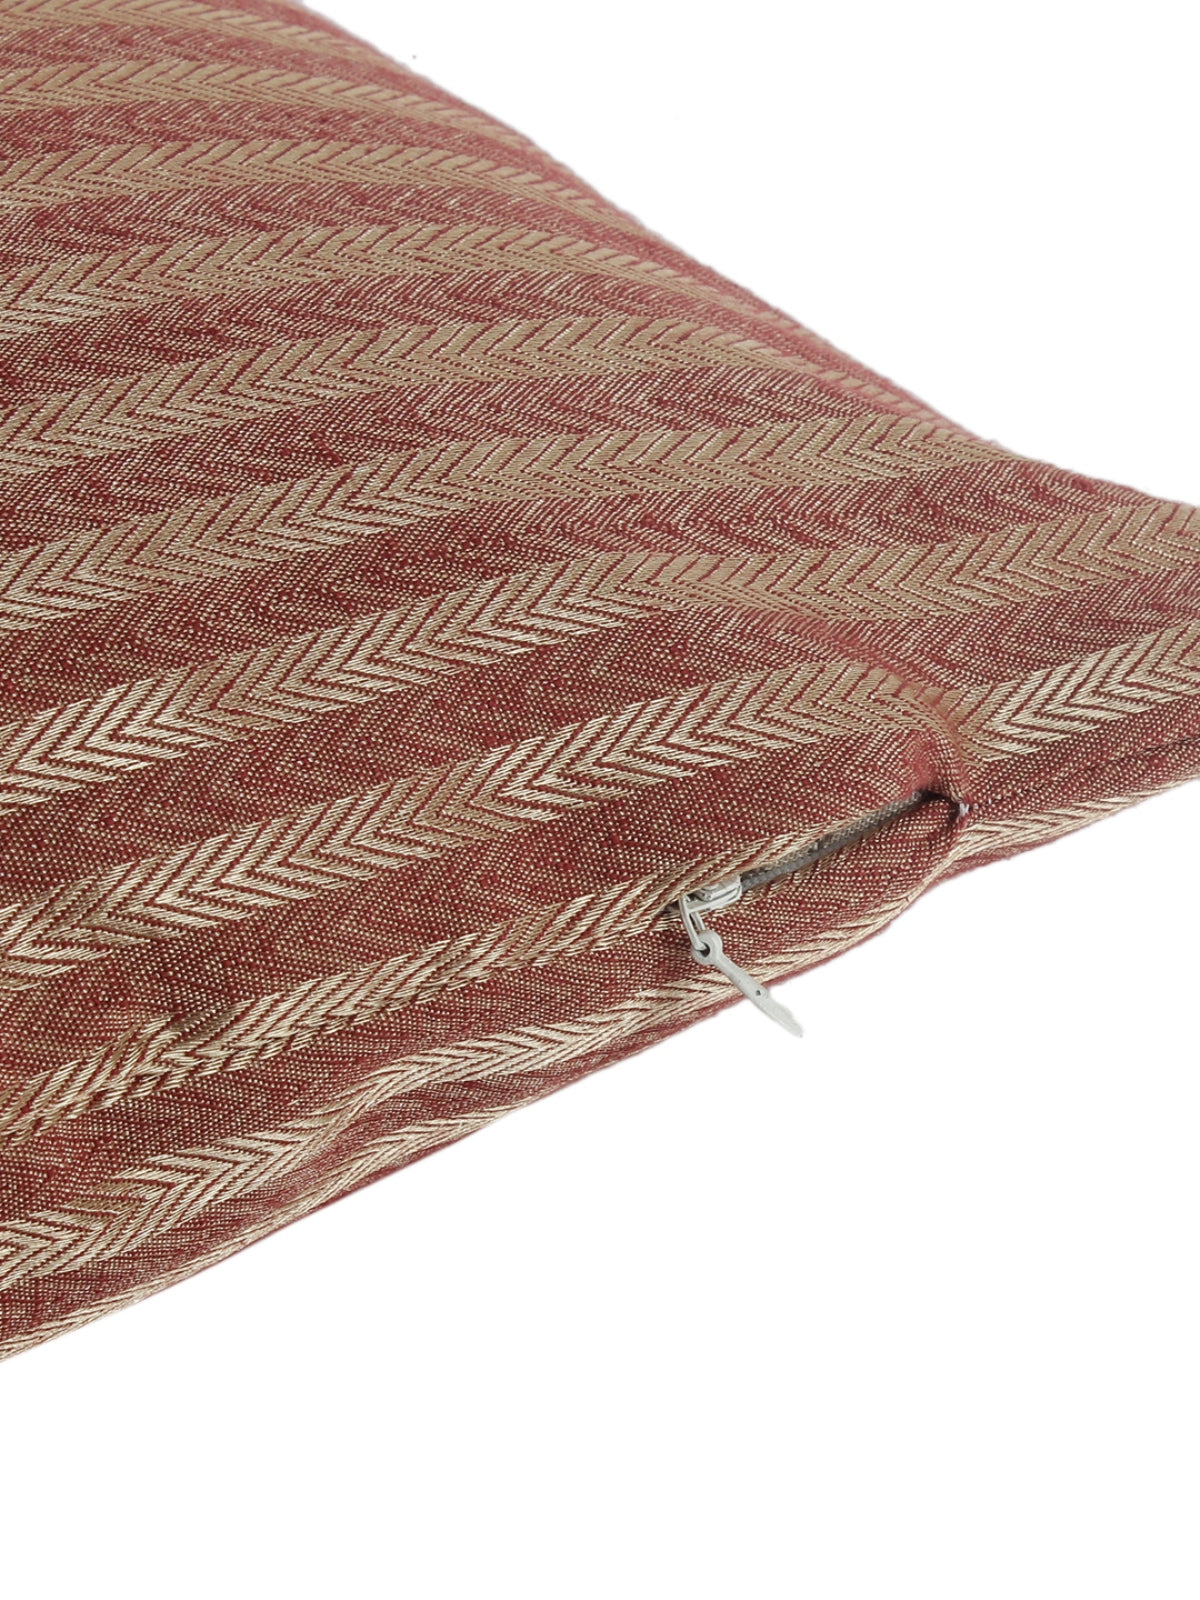 Gold & Maroon Set of 5 Polycotton 12 Inch x 12 Inch Cushion Covers